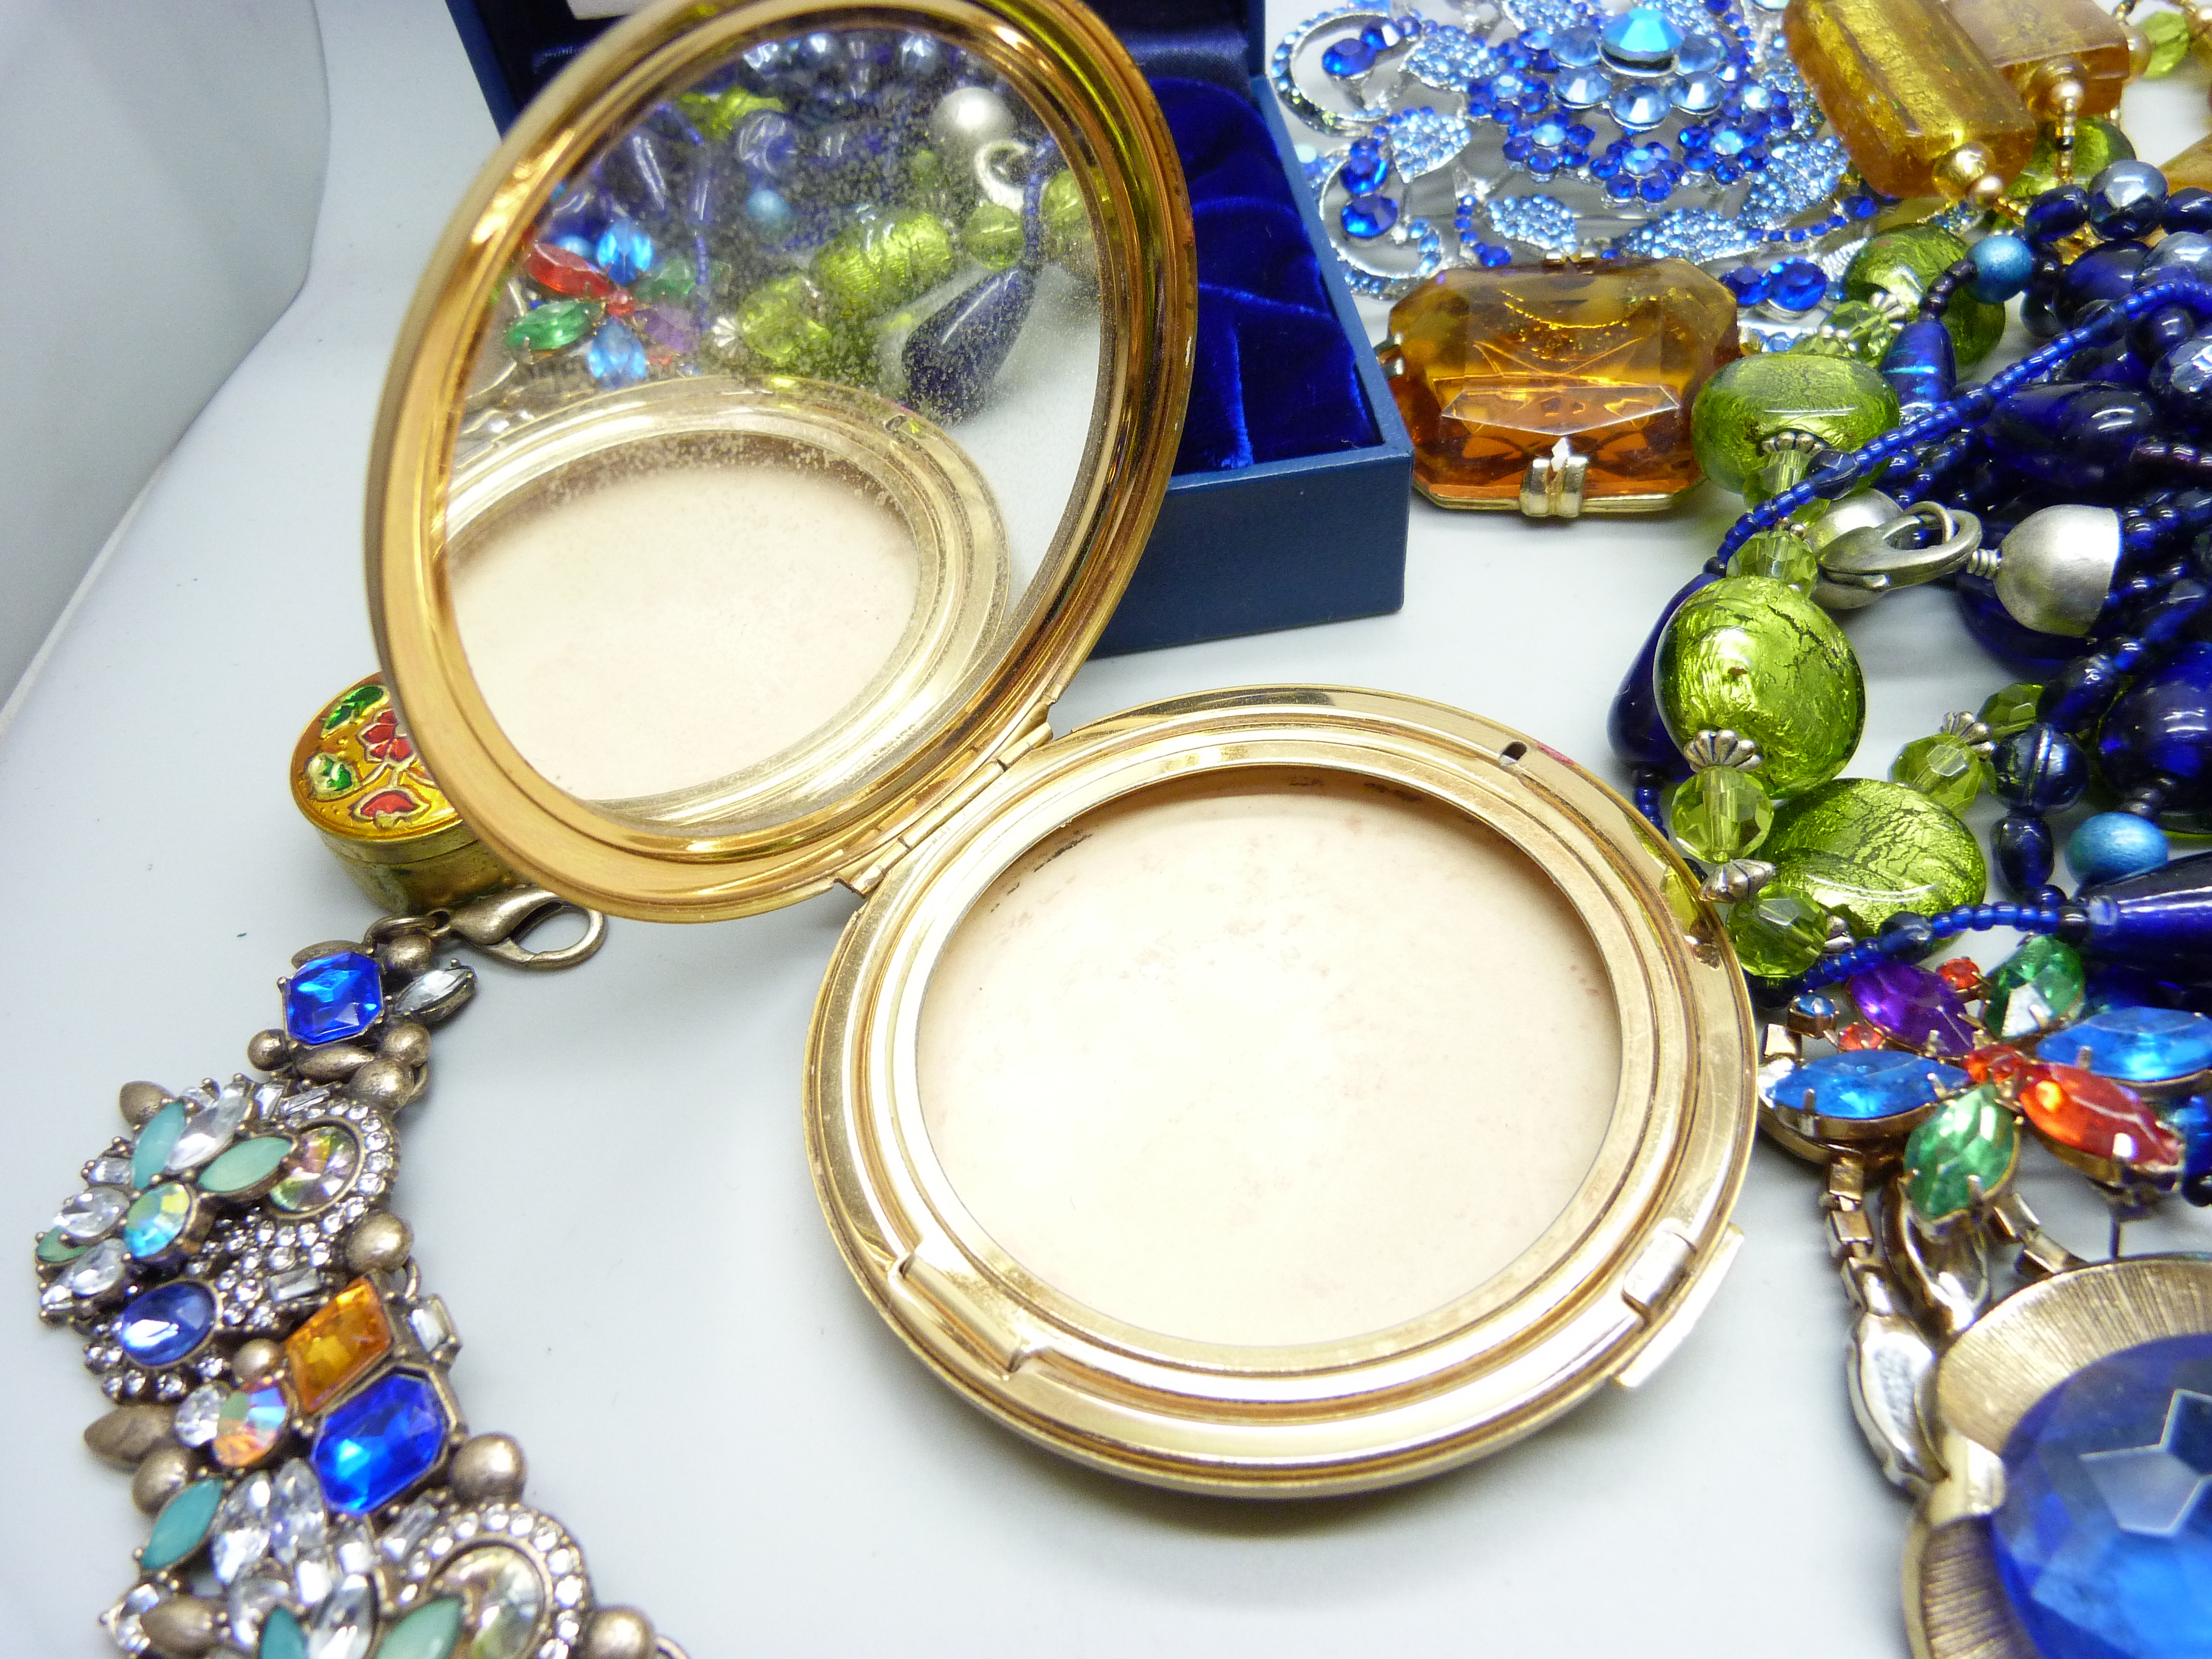 A Halcyon Days enamelled trinket box, a Stratton compact and a collection of brooches, bracelets and - Image 3 of 6